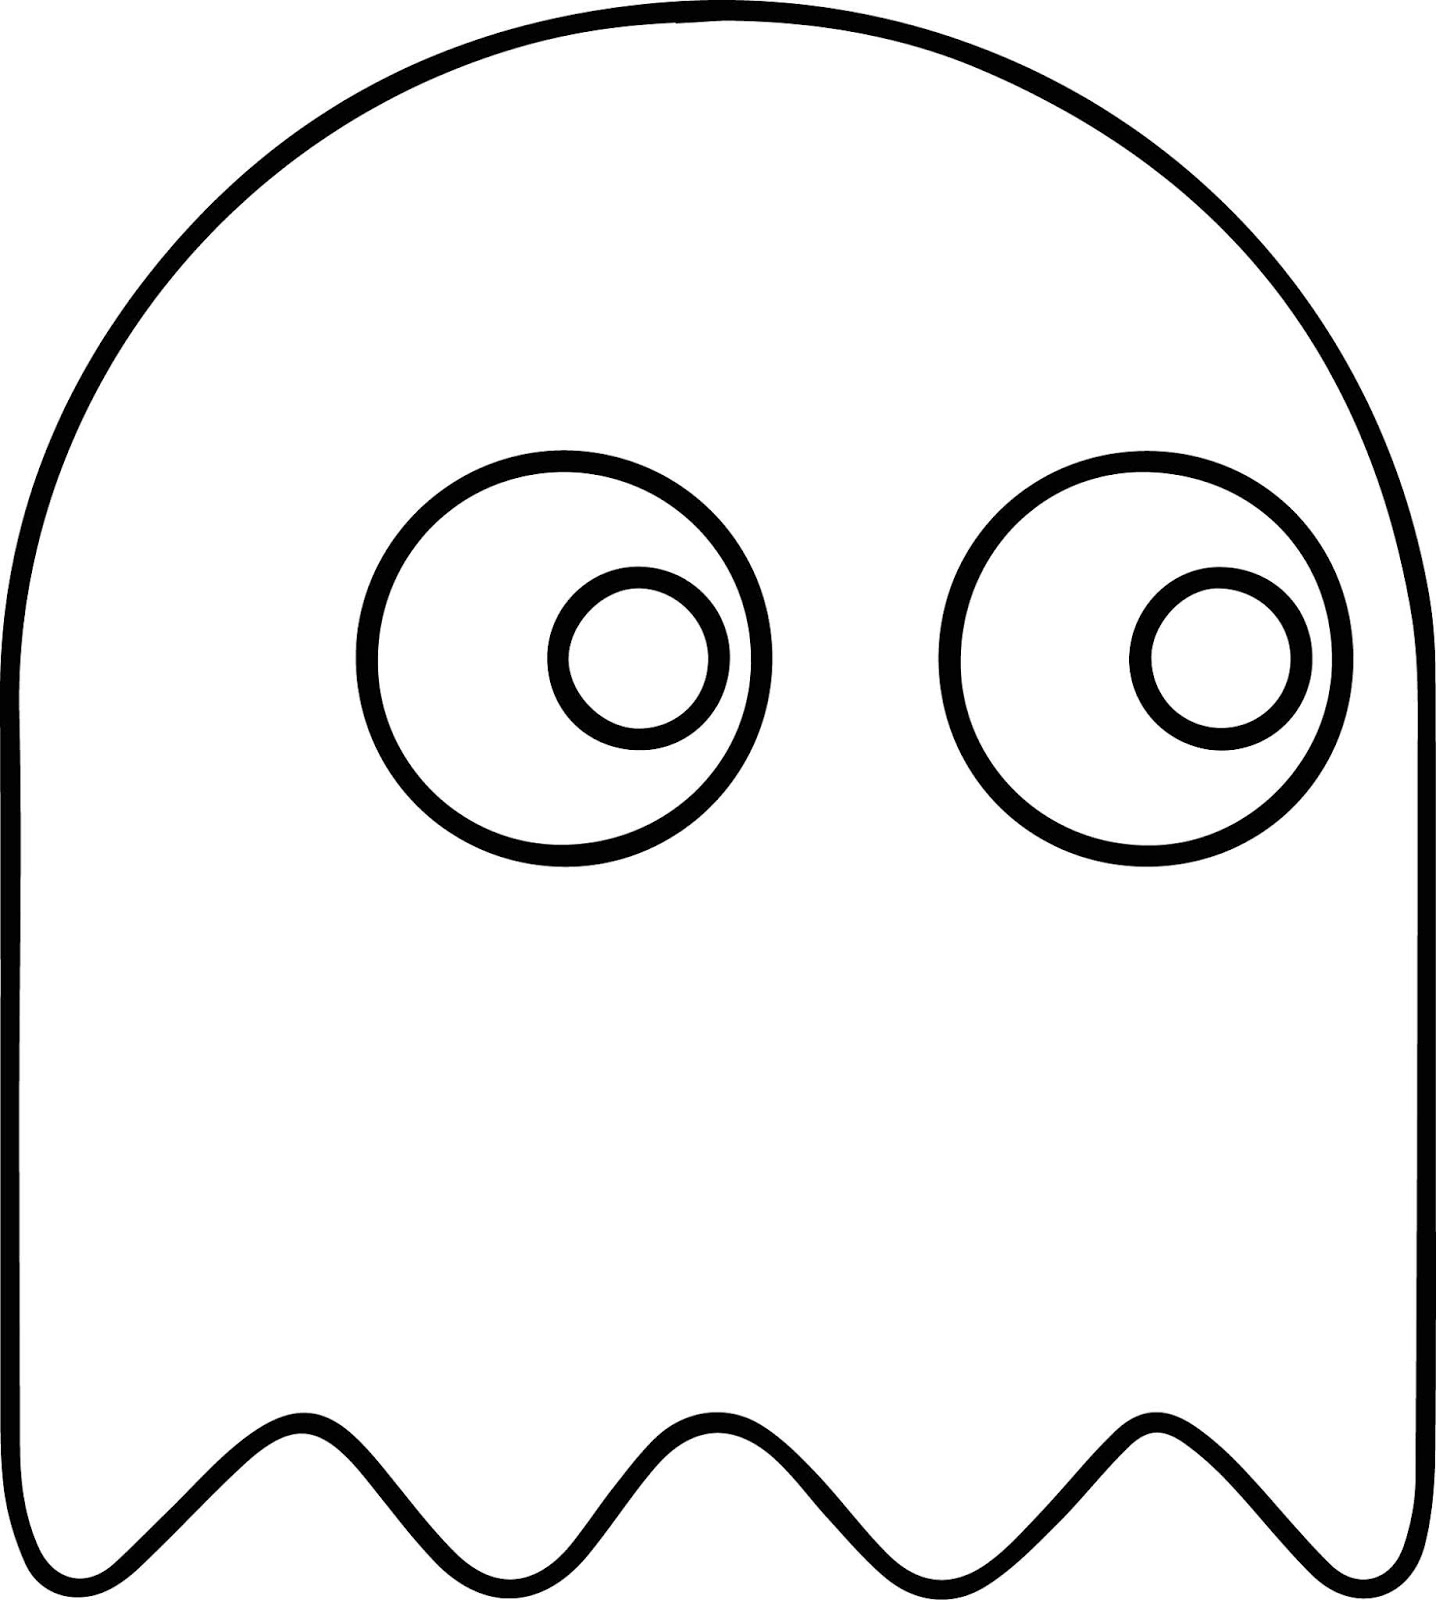 Ghost In Pacman Coloring Page Free Printable Coloring Pages for Kids